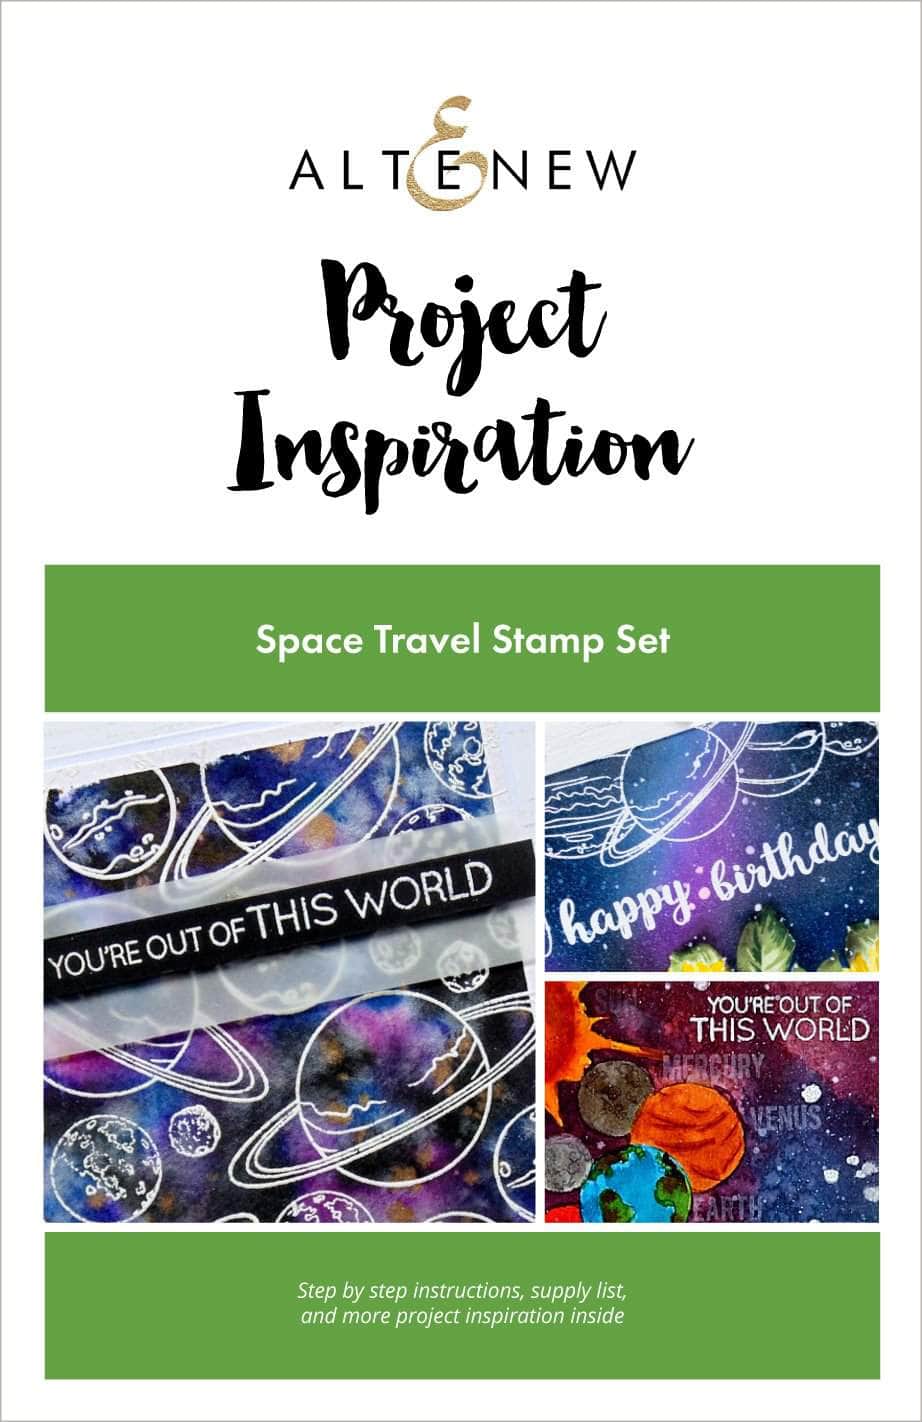 Printed Media Space Travel Inspiration Guide